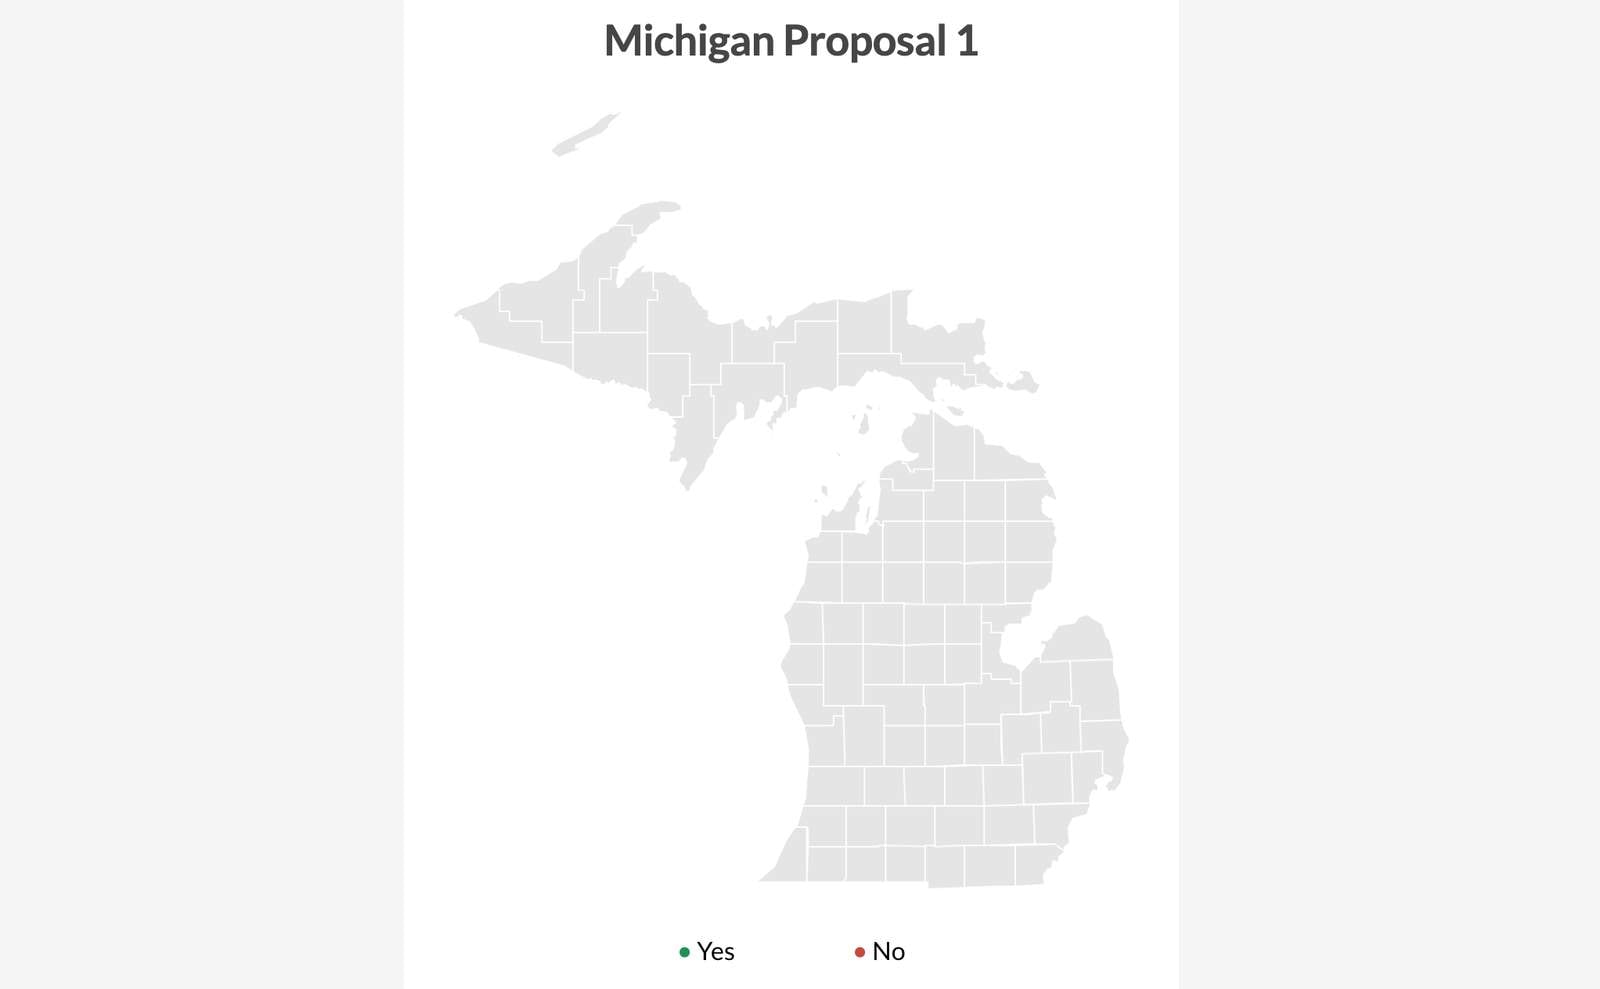 2020 election results: Michigan Proposal 1 outcome mapped by county